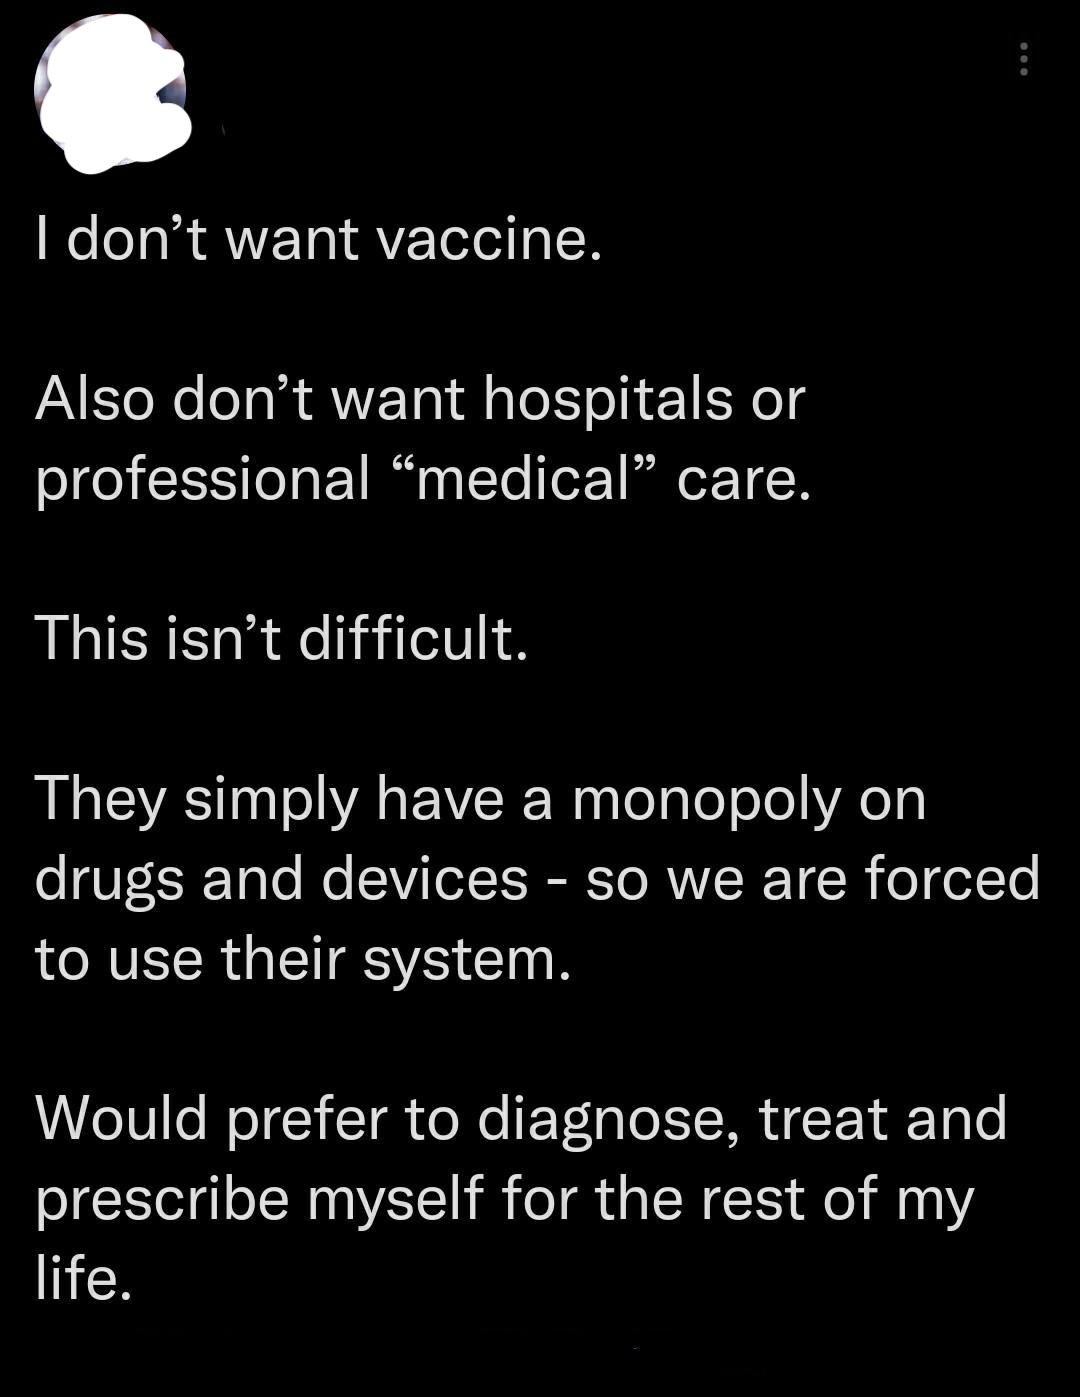 person says they don&#x27;t want vaccine or hospitals or medical care because they have a monopoly, so the person will just treat themselves